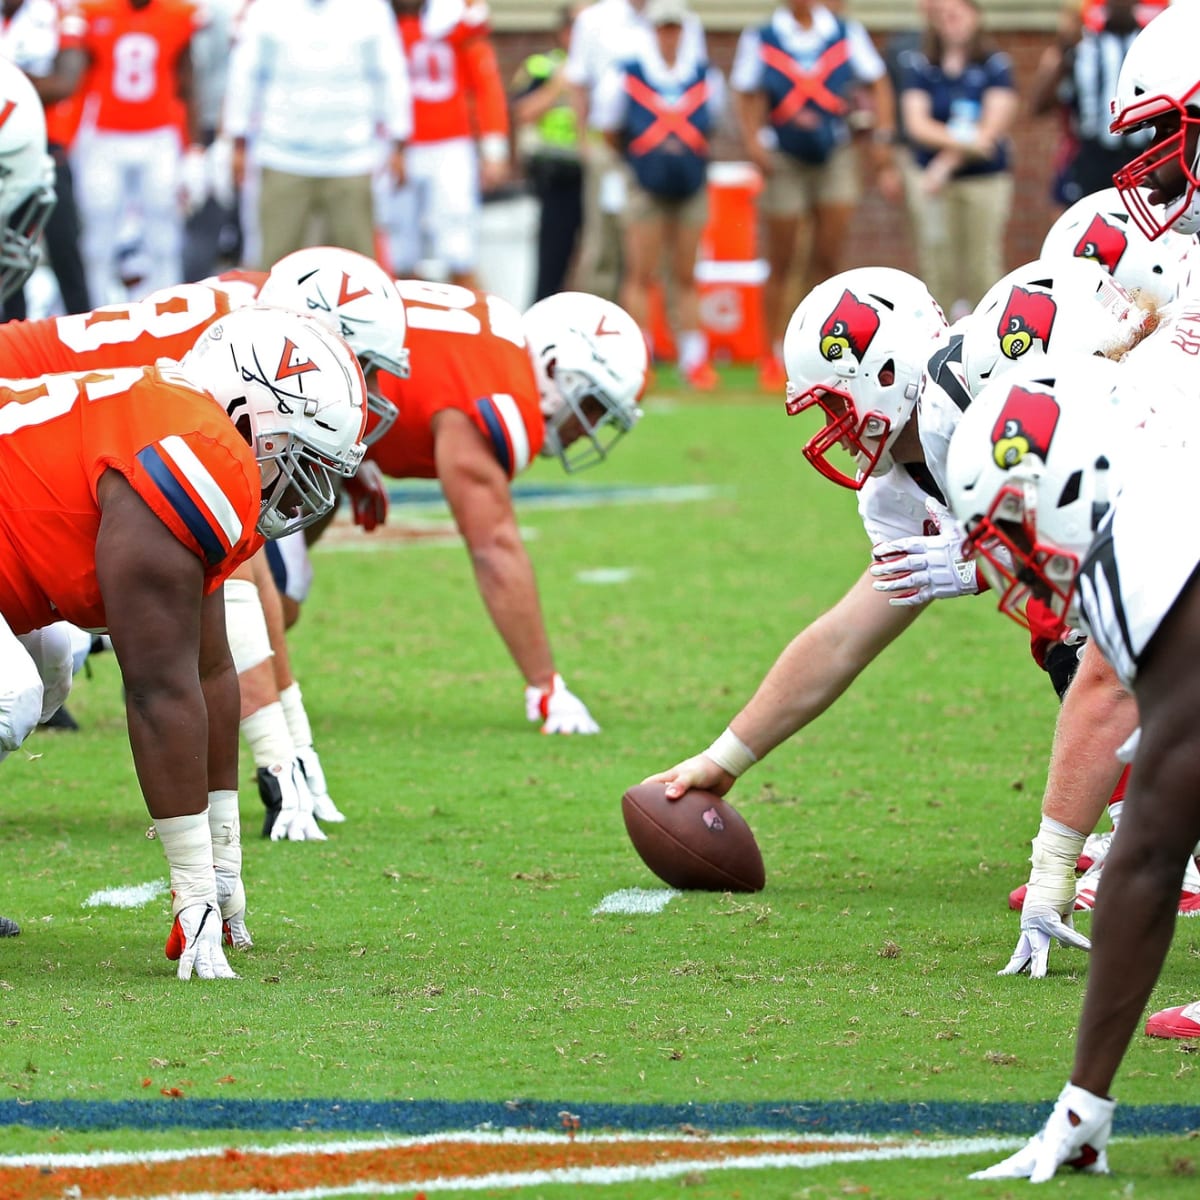 Preview: Louisville Cardinals vs. Virginia Cavaliers - Sports Illustrated Louisville  Cardinals News, Analysis and More